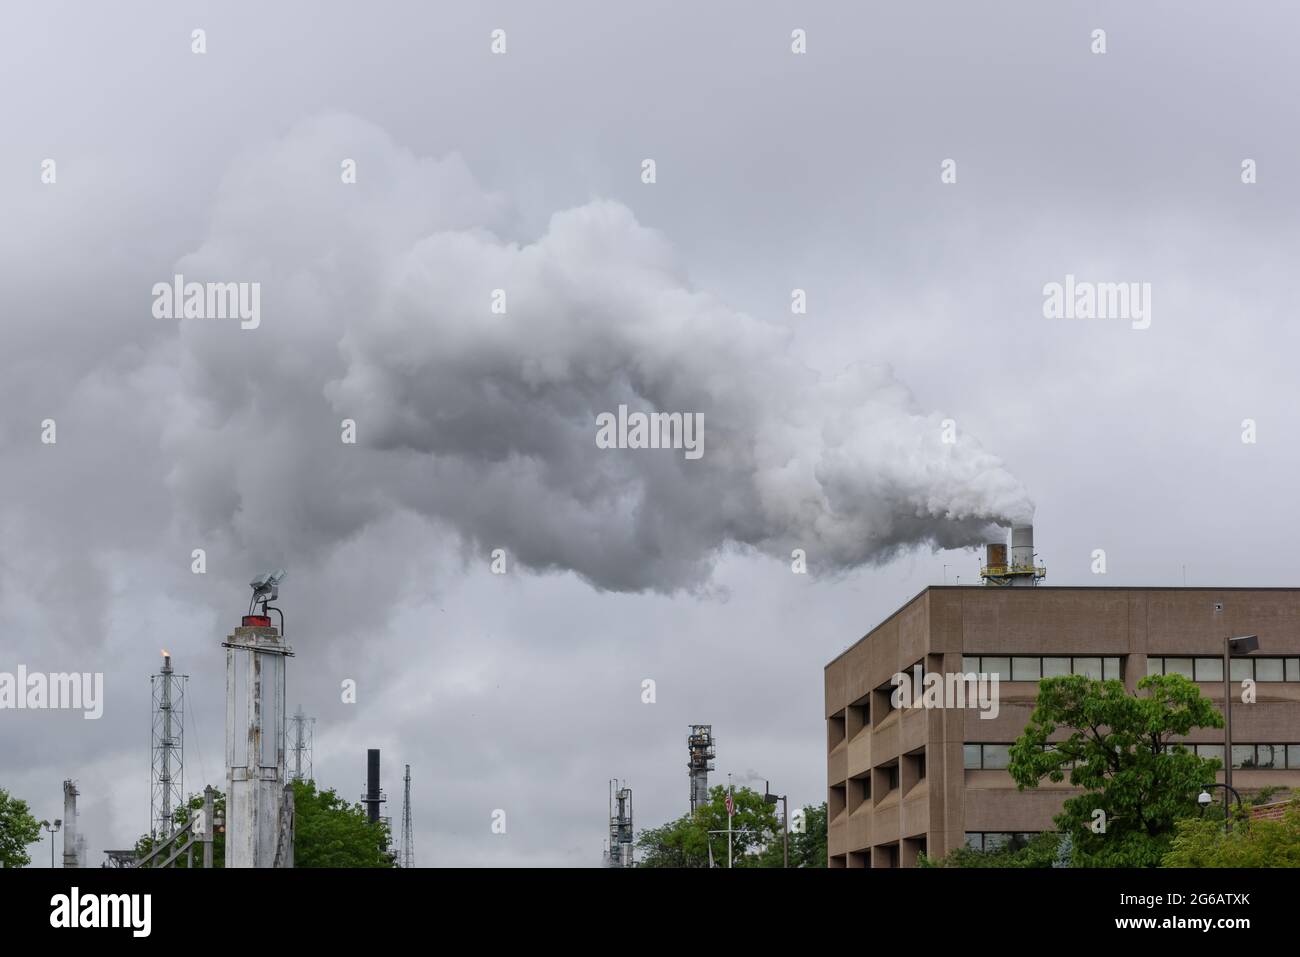 Smoke filled sky polluting the environment from a refinery. Stock Photo